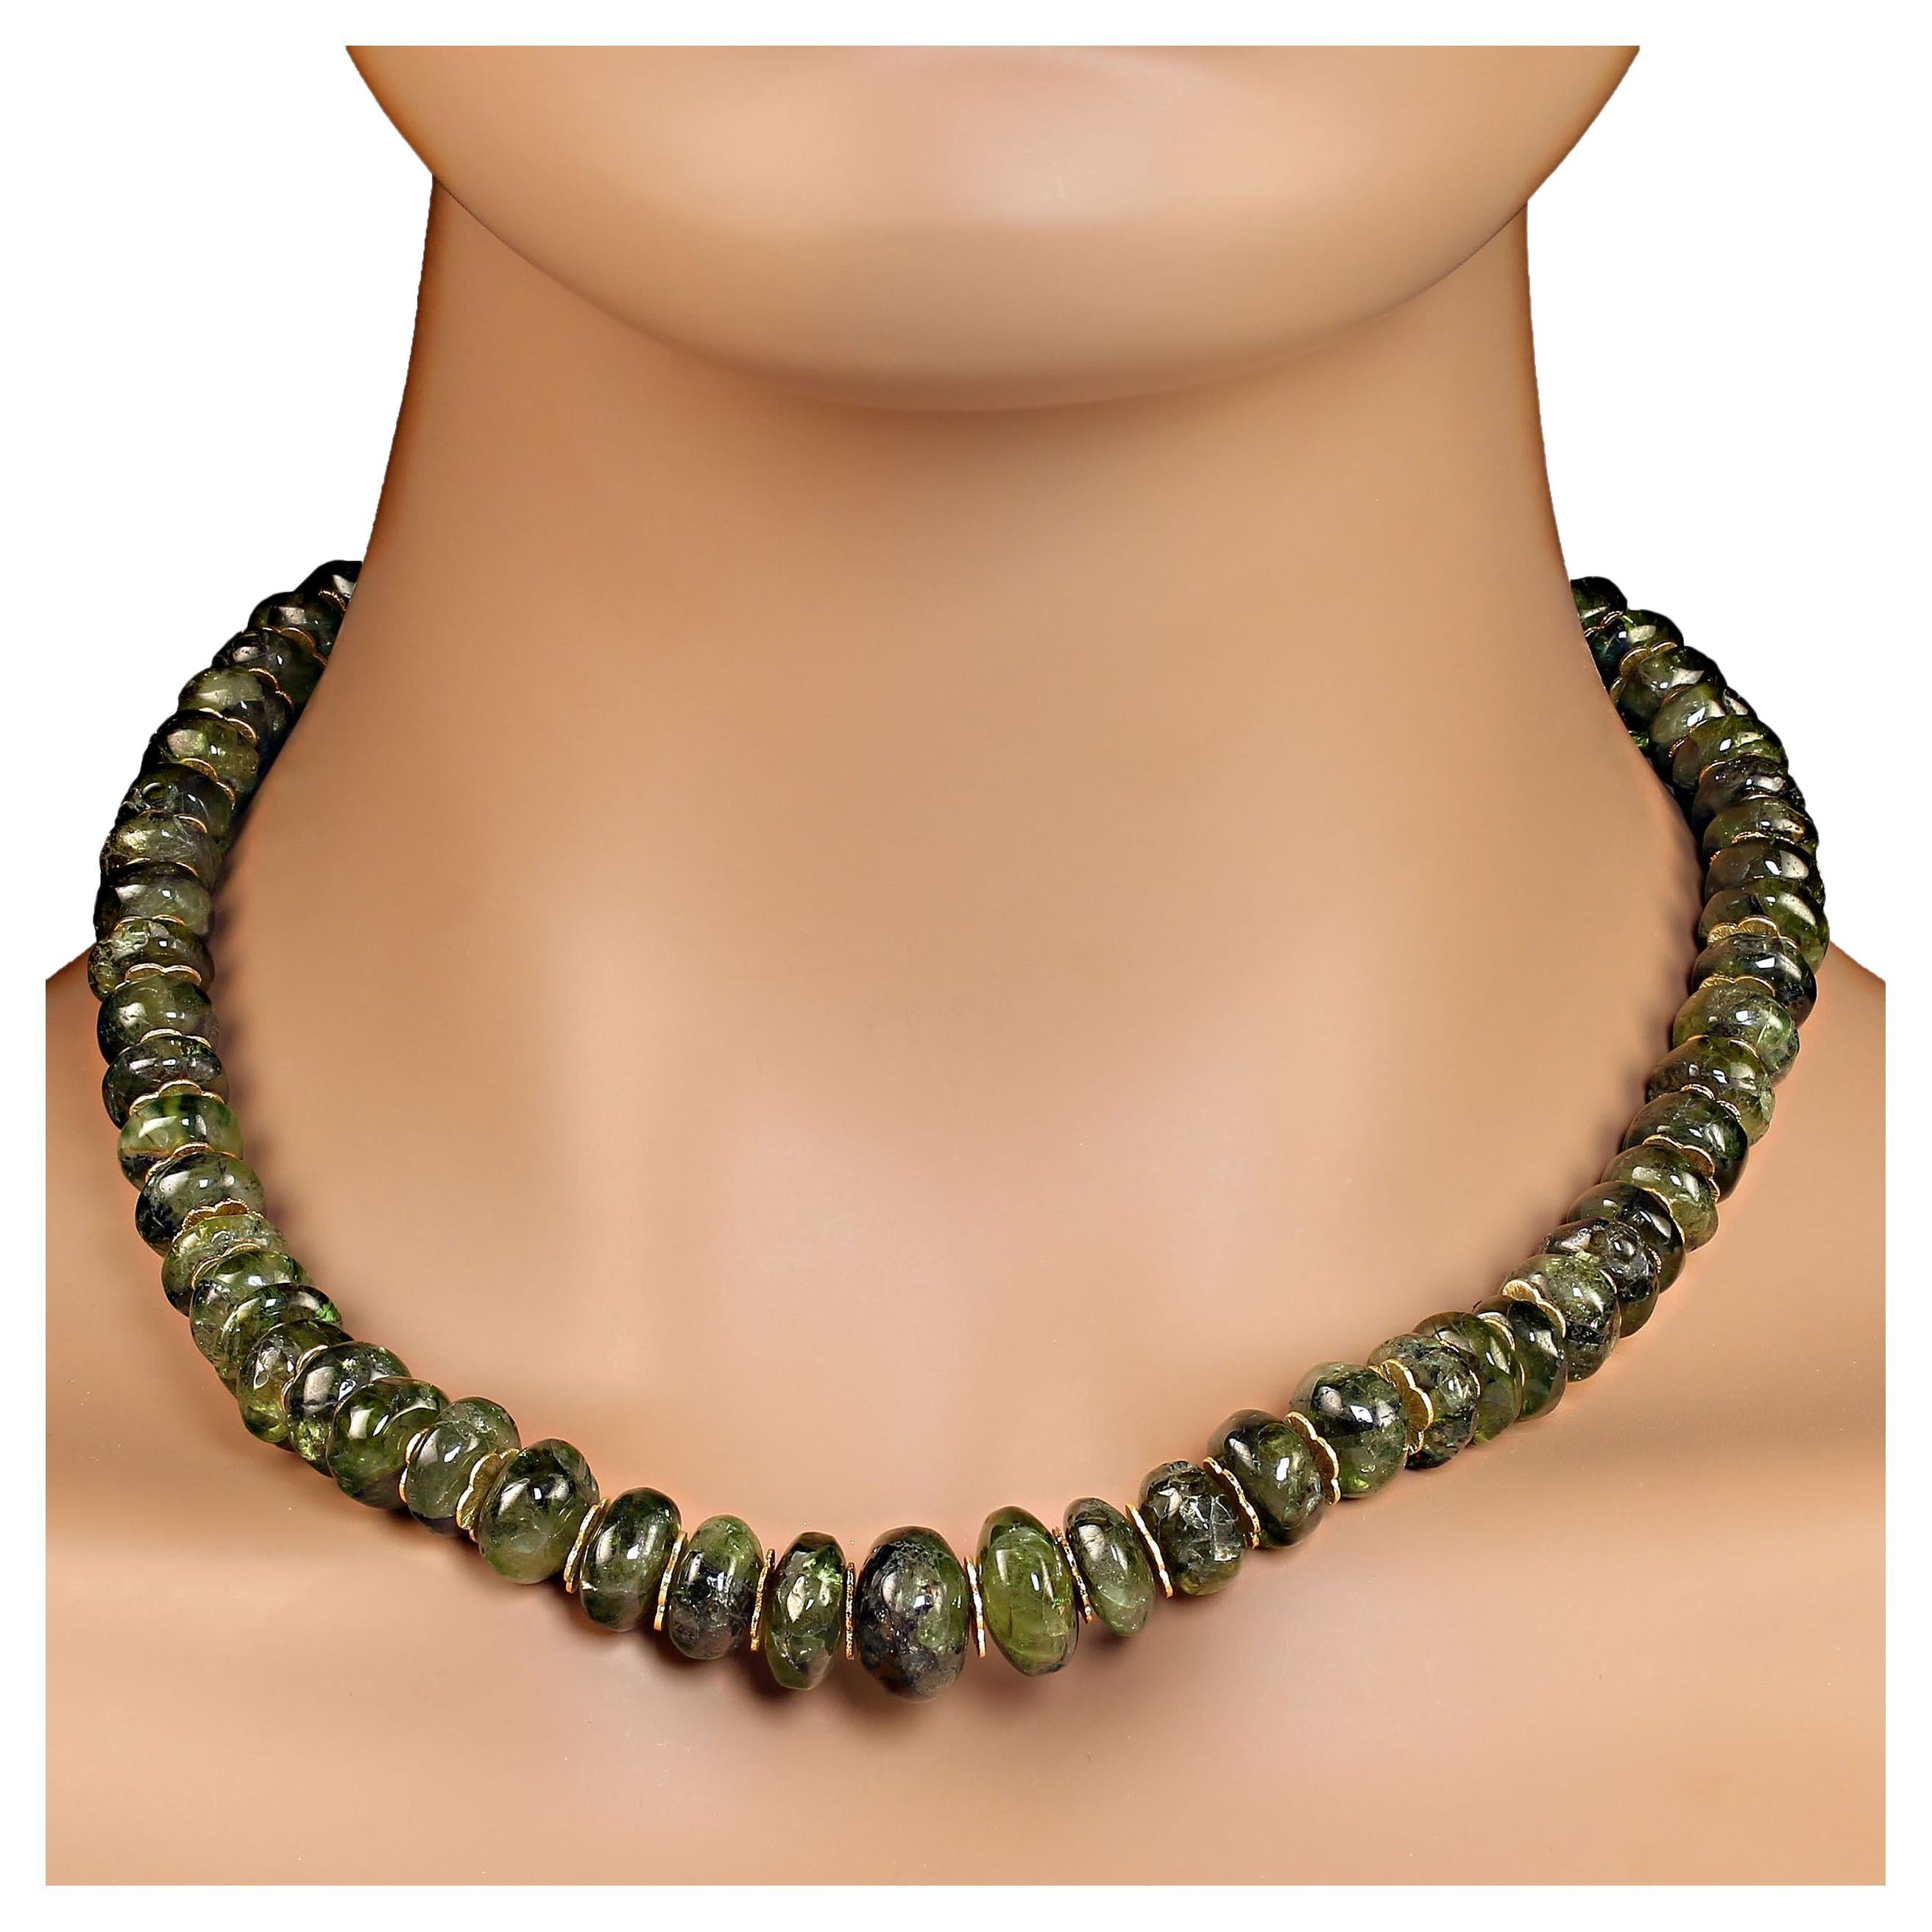 AJD Unique 19 In Graduated Green Garnet Necklace with goldy accents  Great Gift! For Sale